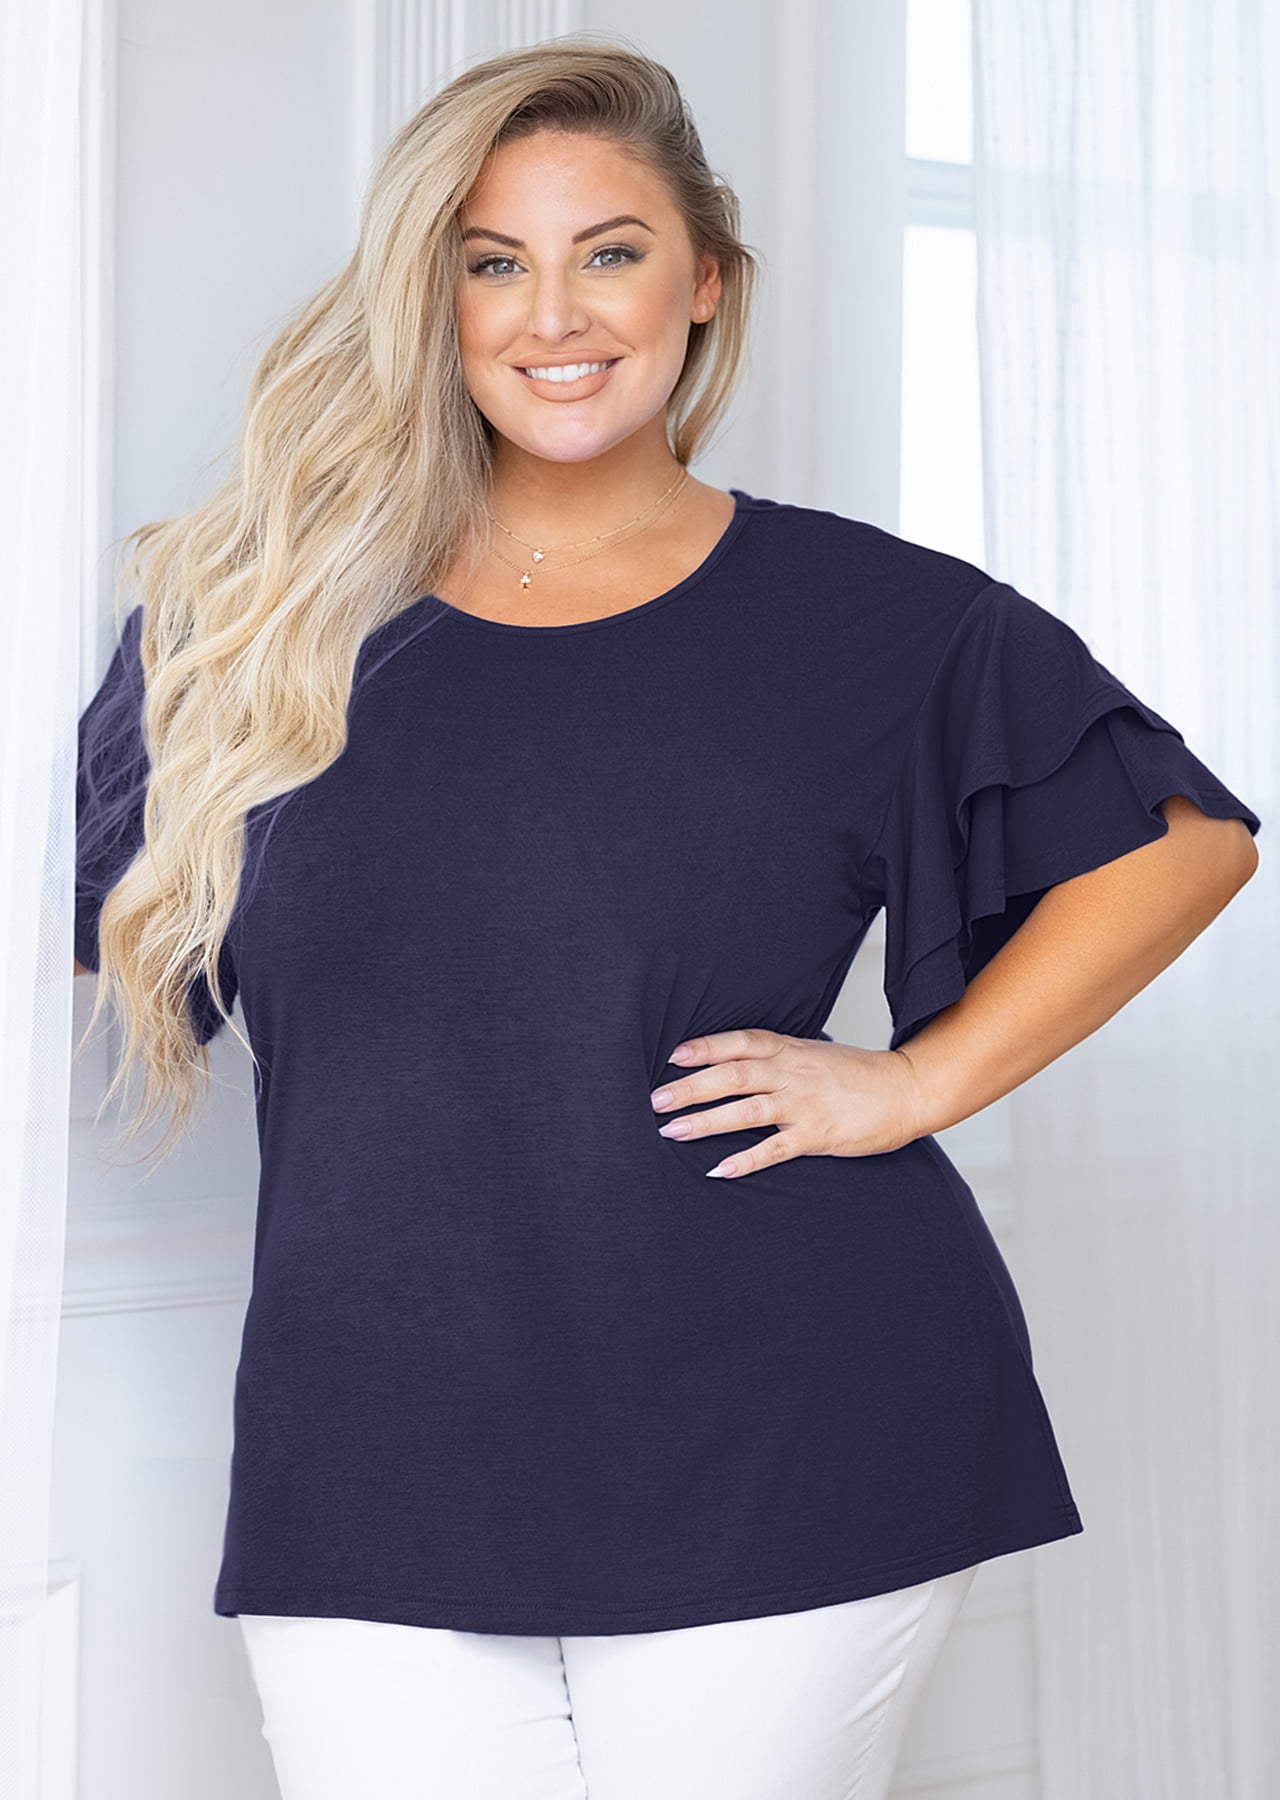 SHOWMALL Plus Size Clothes for Women Navy Blue 1X Shirt Crewneck Short  Sleeve Tunic Flowy Summer Loose Fitting Clothes 